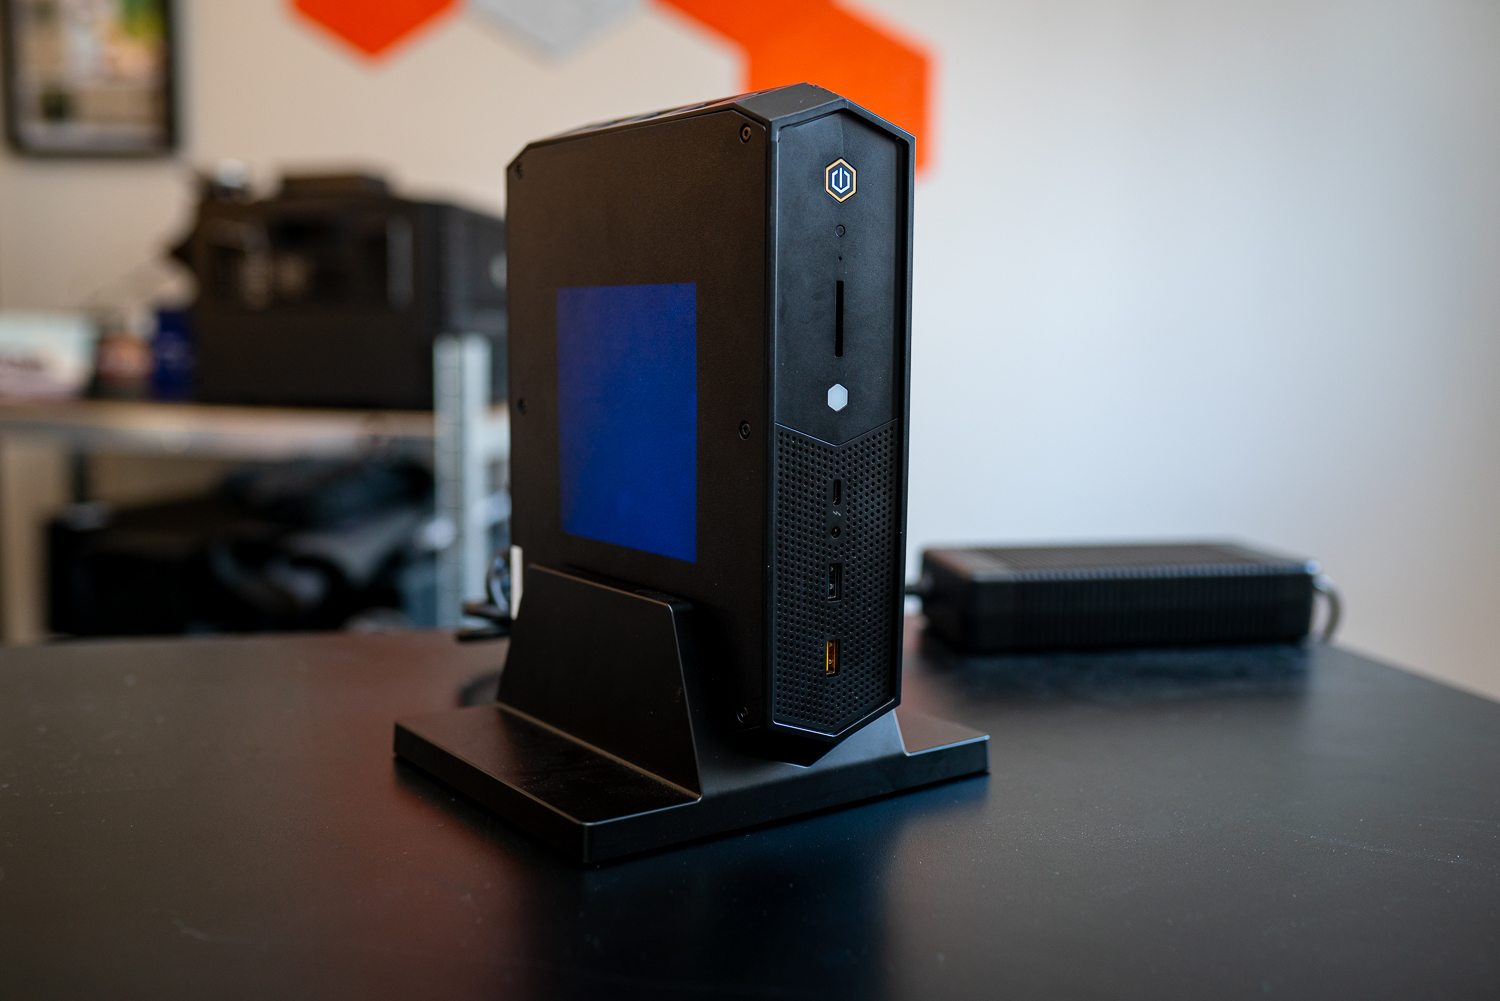 Intel NUC 12 Enthusiast review: a book-sized gaming PC